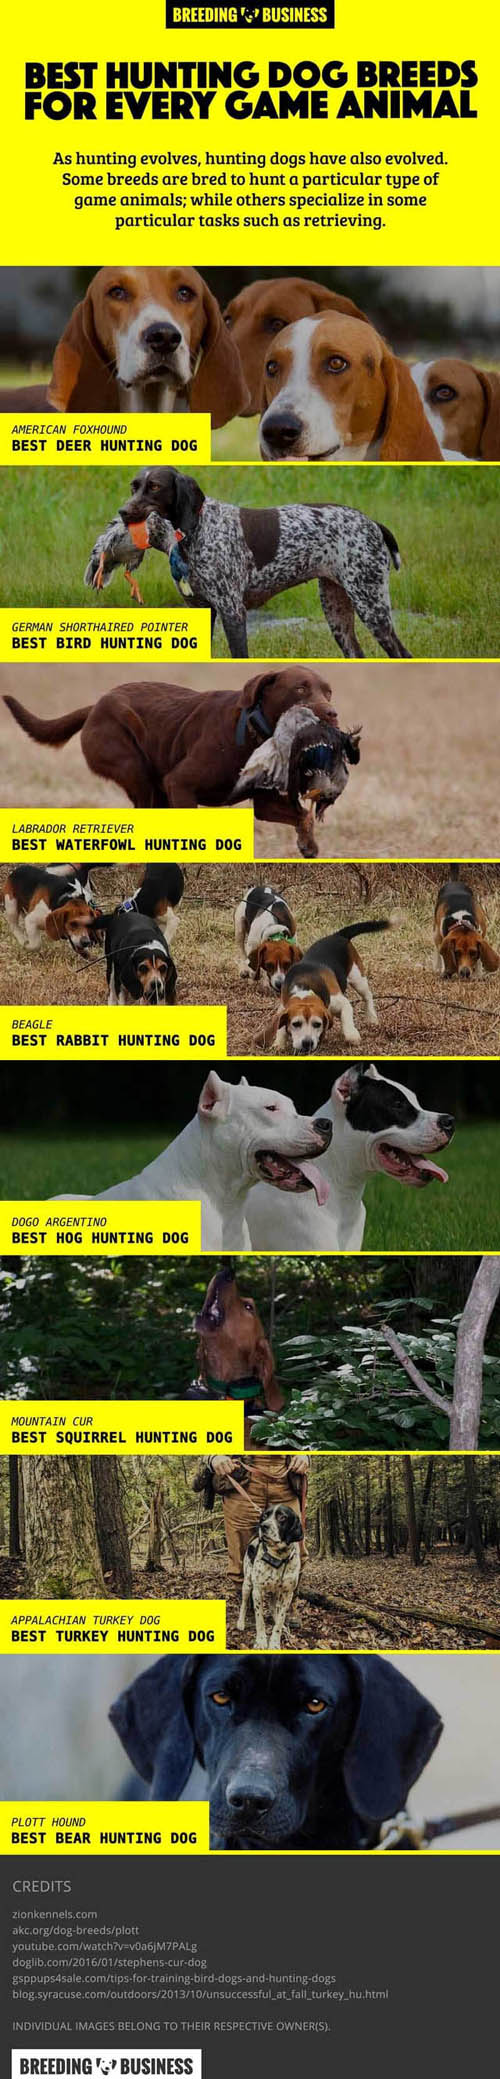 BEST HUNTING DOGS FOR EACH GAME